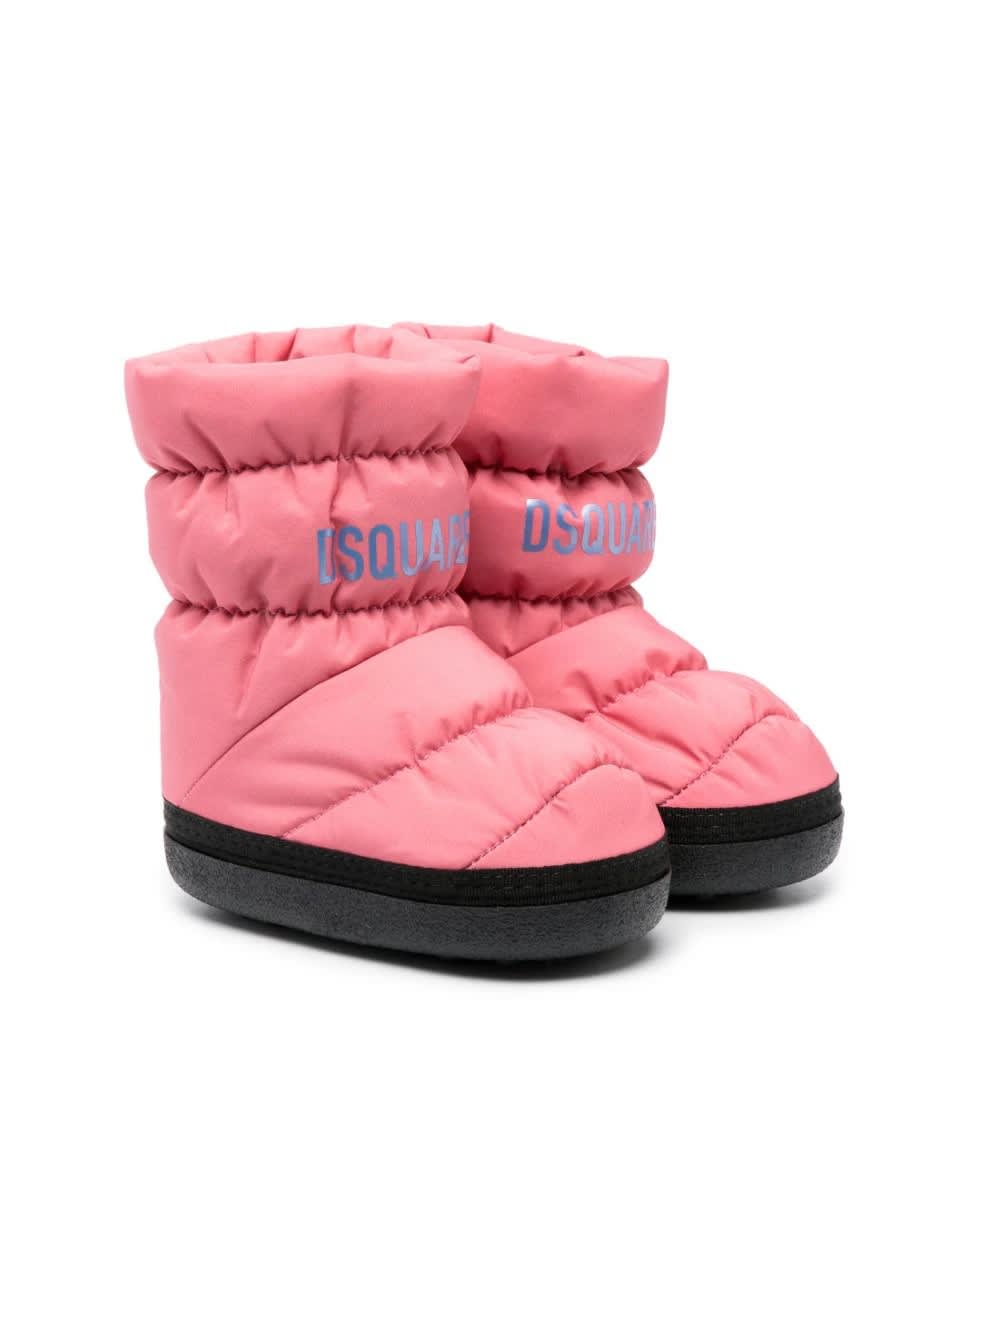 Dsquared2 Snow Boots With Print